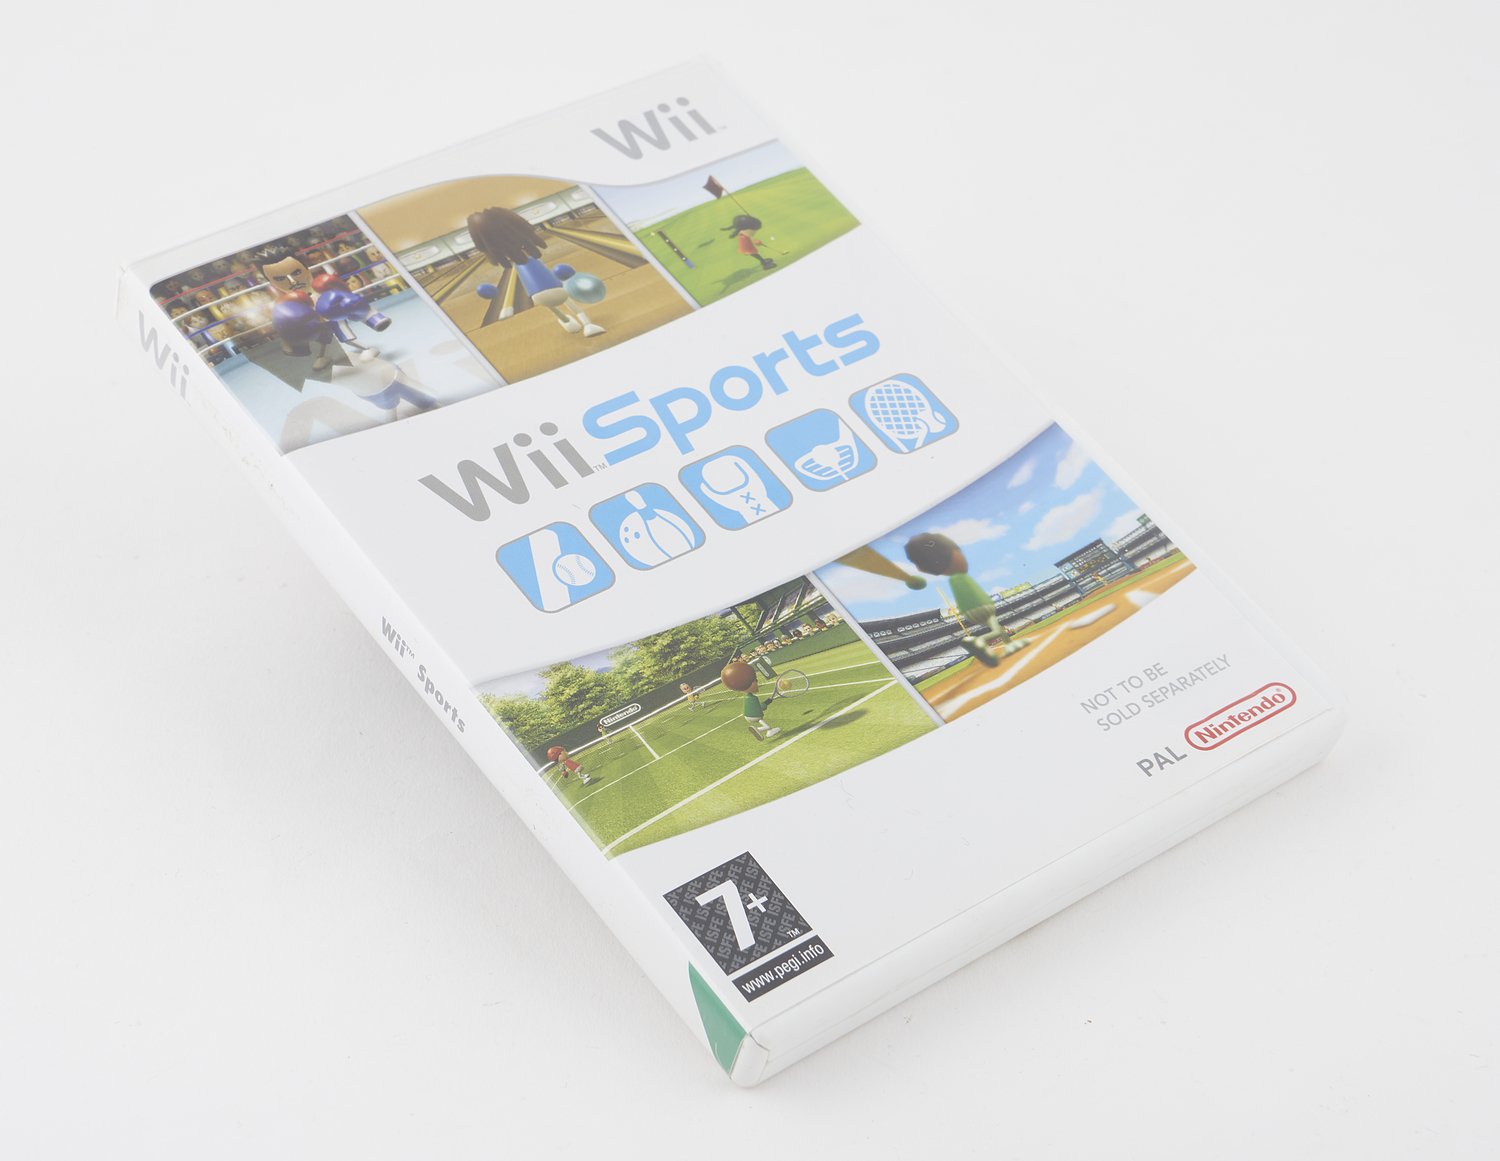 White DVD box for Wii Sports game, on a white background